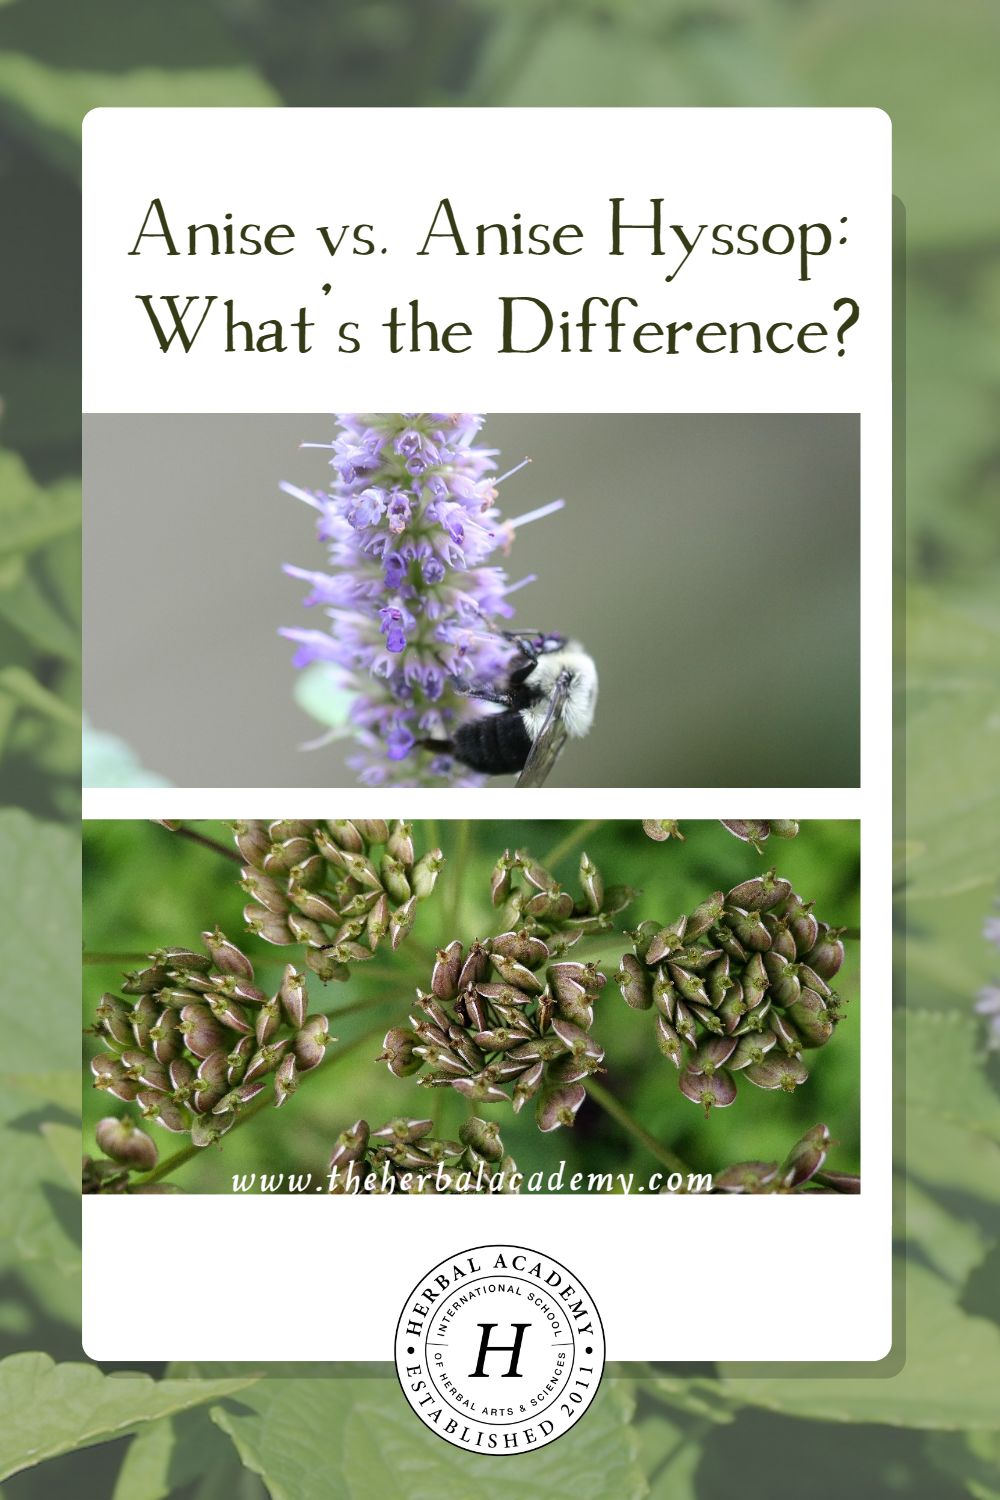 Anise vs. Anise Hyssop: What's the Difference? | Herbal Academy | After diving into the botany of anise and anise hyssop, it is obvious these plants are distinctly different, each offering their own gifts.